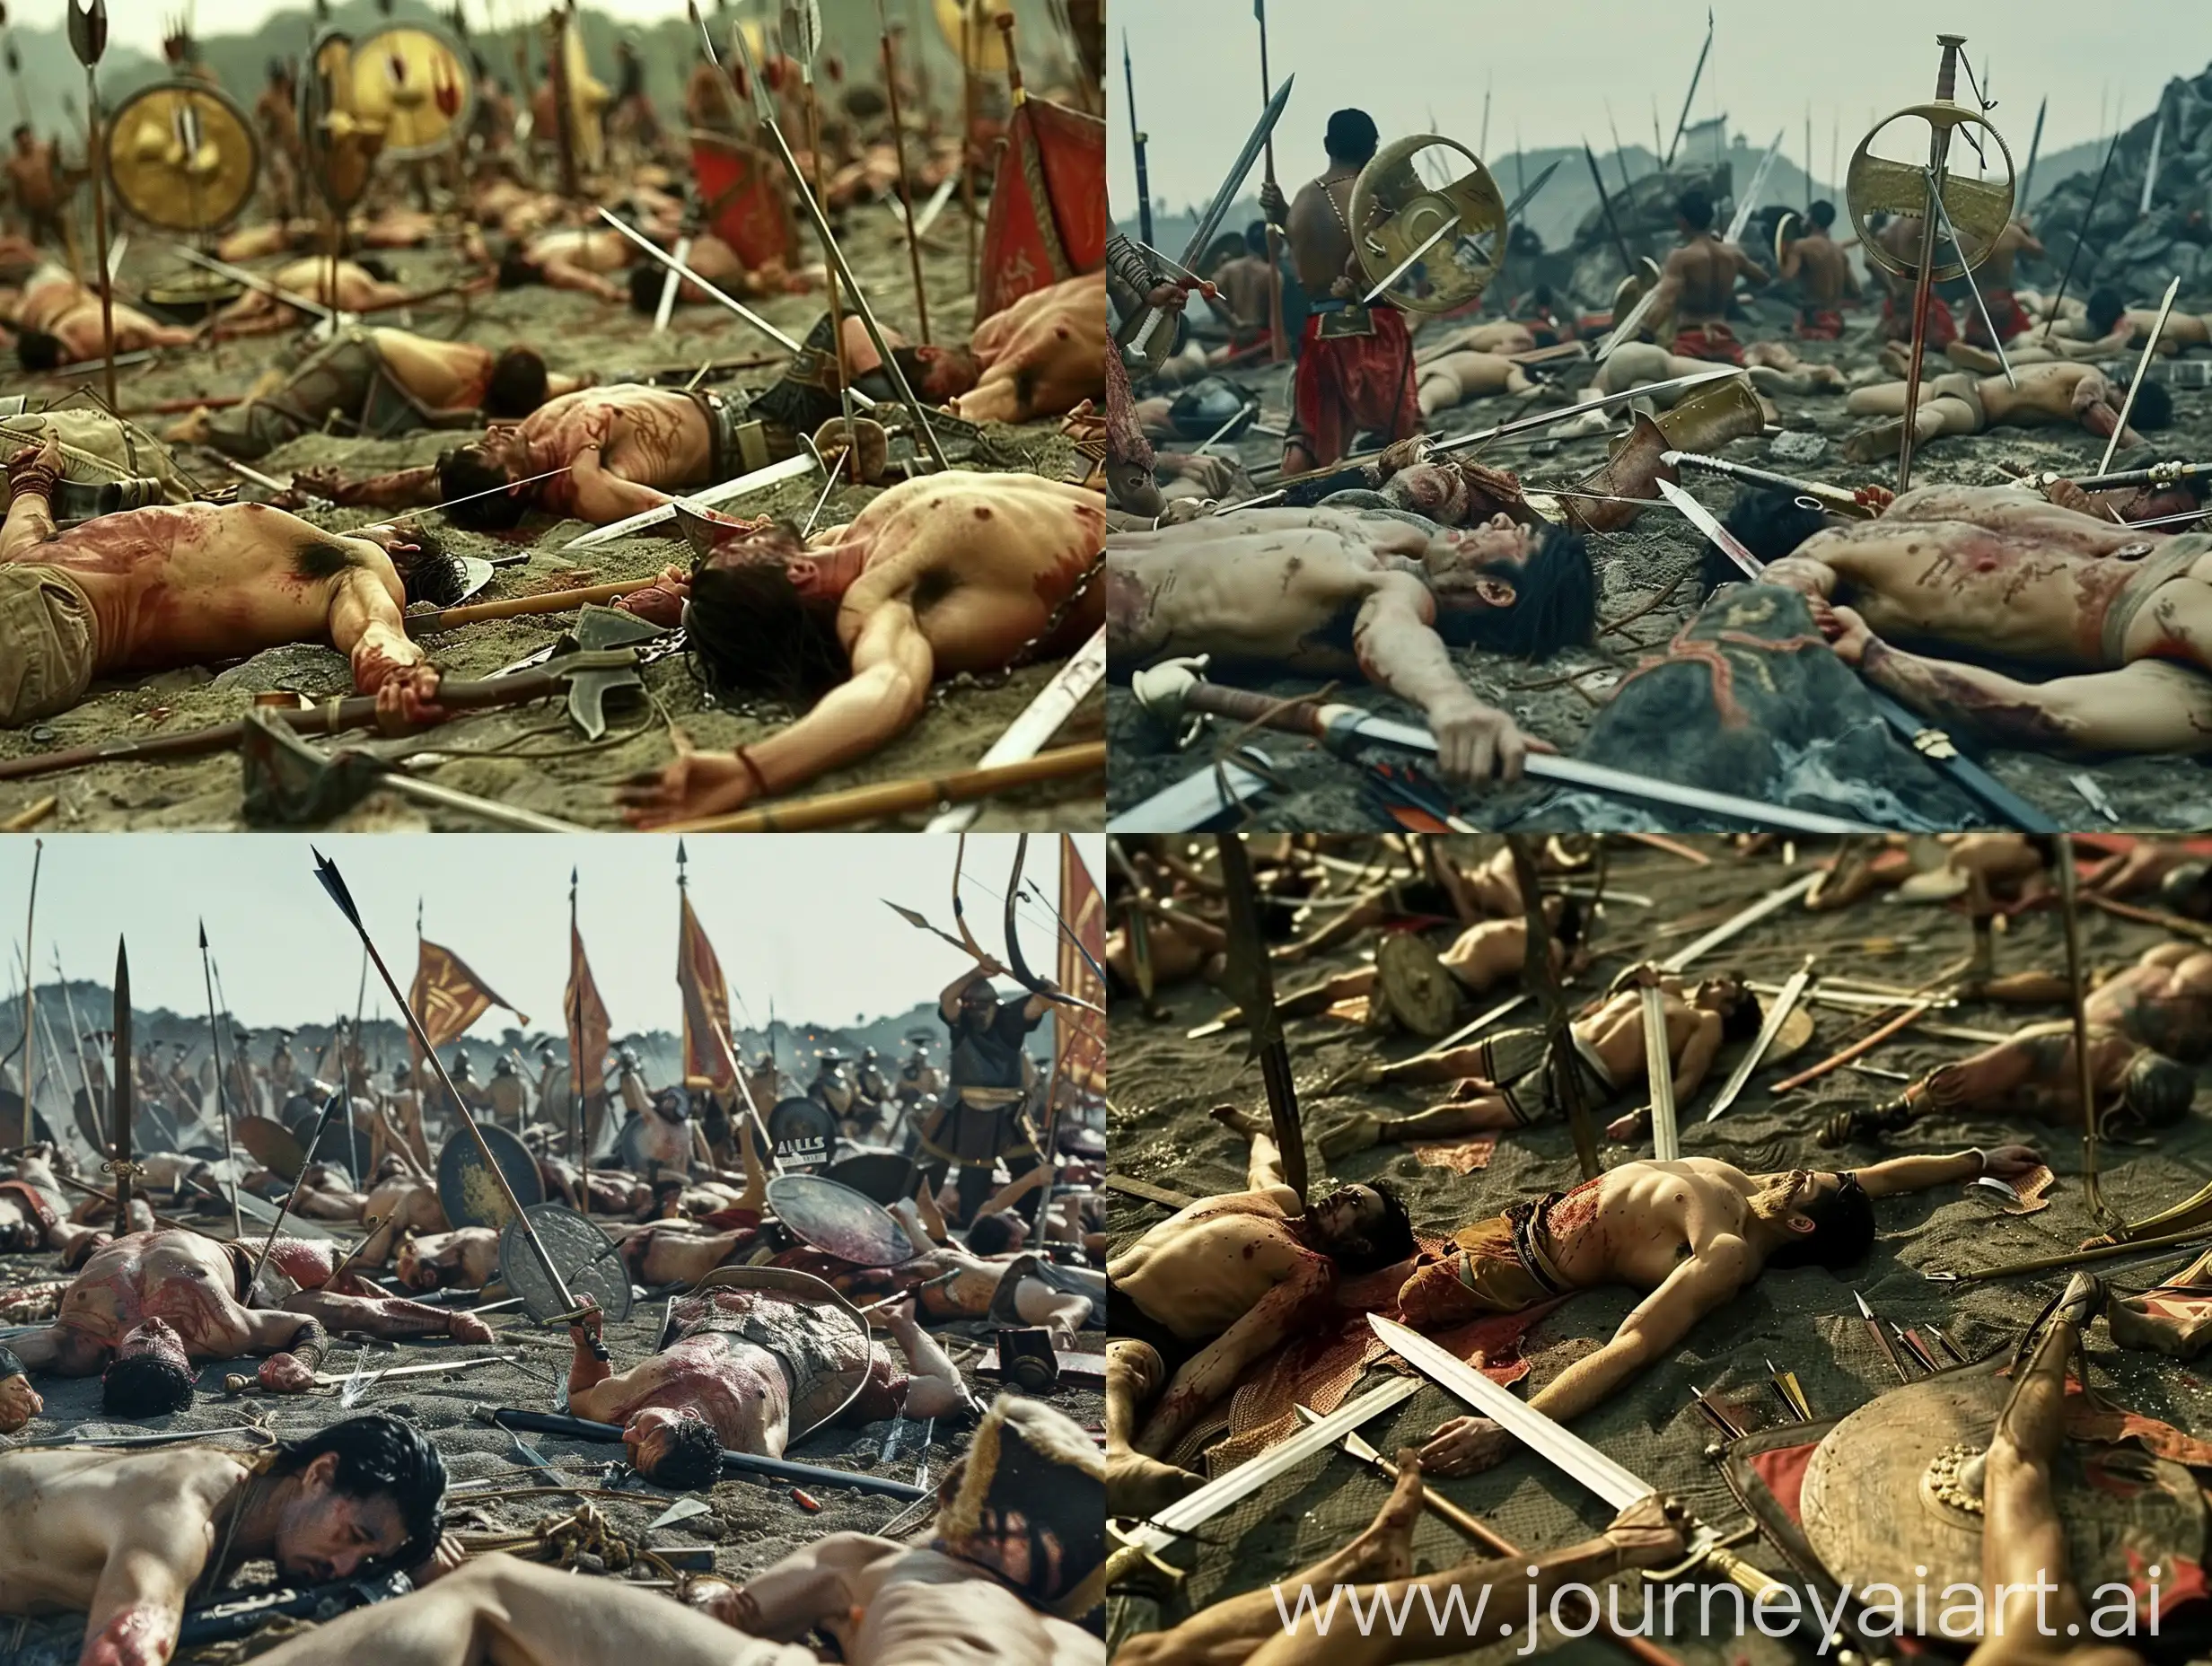 Movie scene, movie scene, many soldiers died in battle, the fallen soldiers were dressed without shirts, some were hit by arrows, swords were scattered,